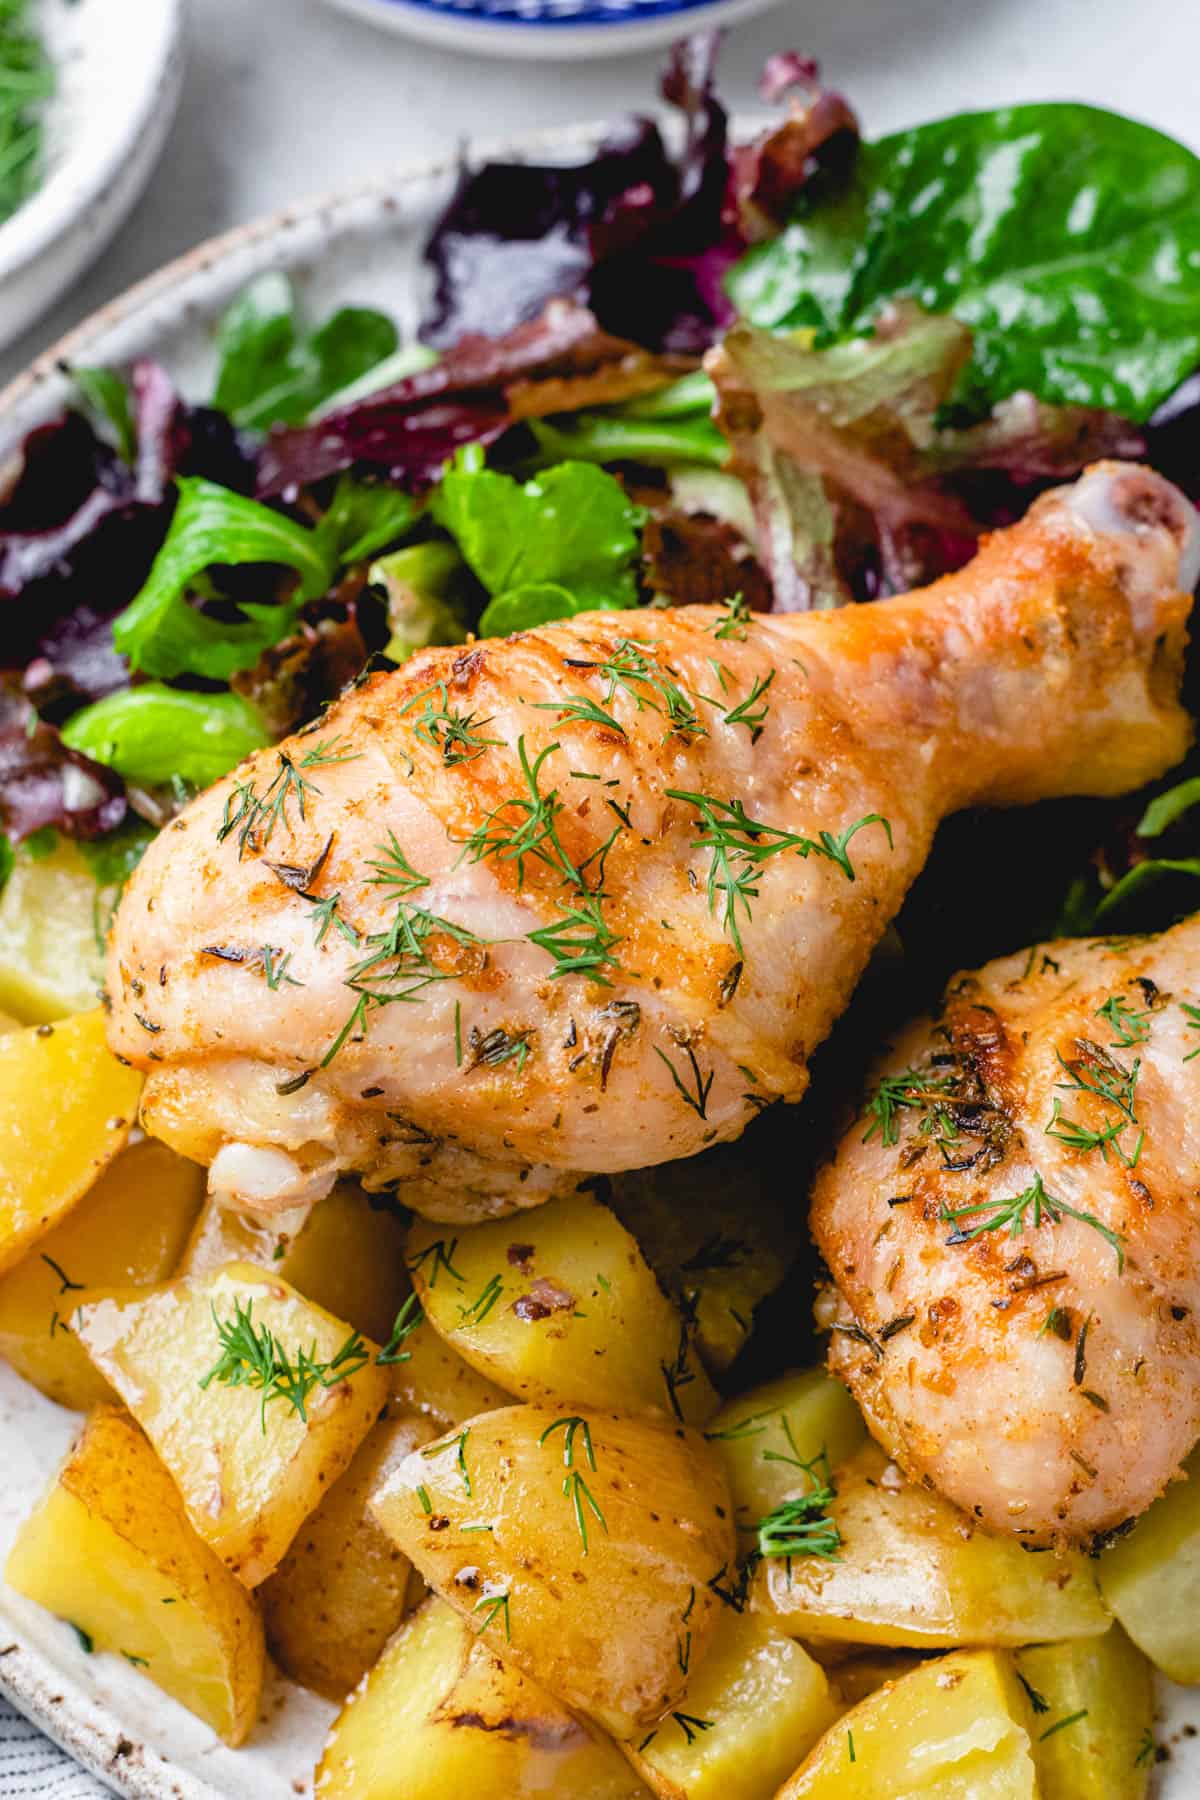 Chicken drumsticks with potatoes and salad on a plate.